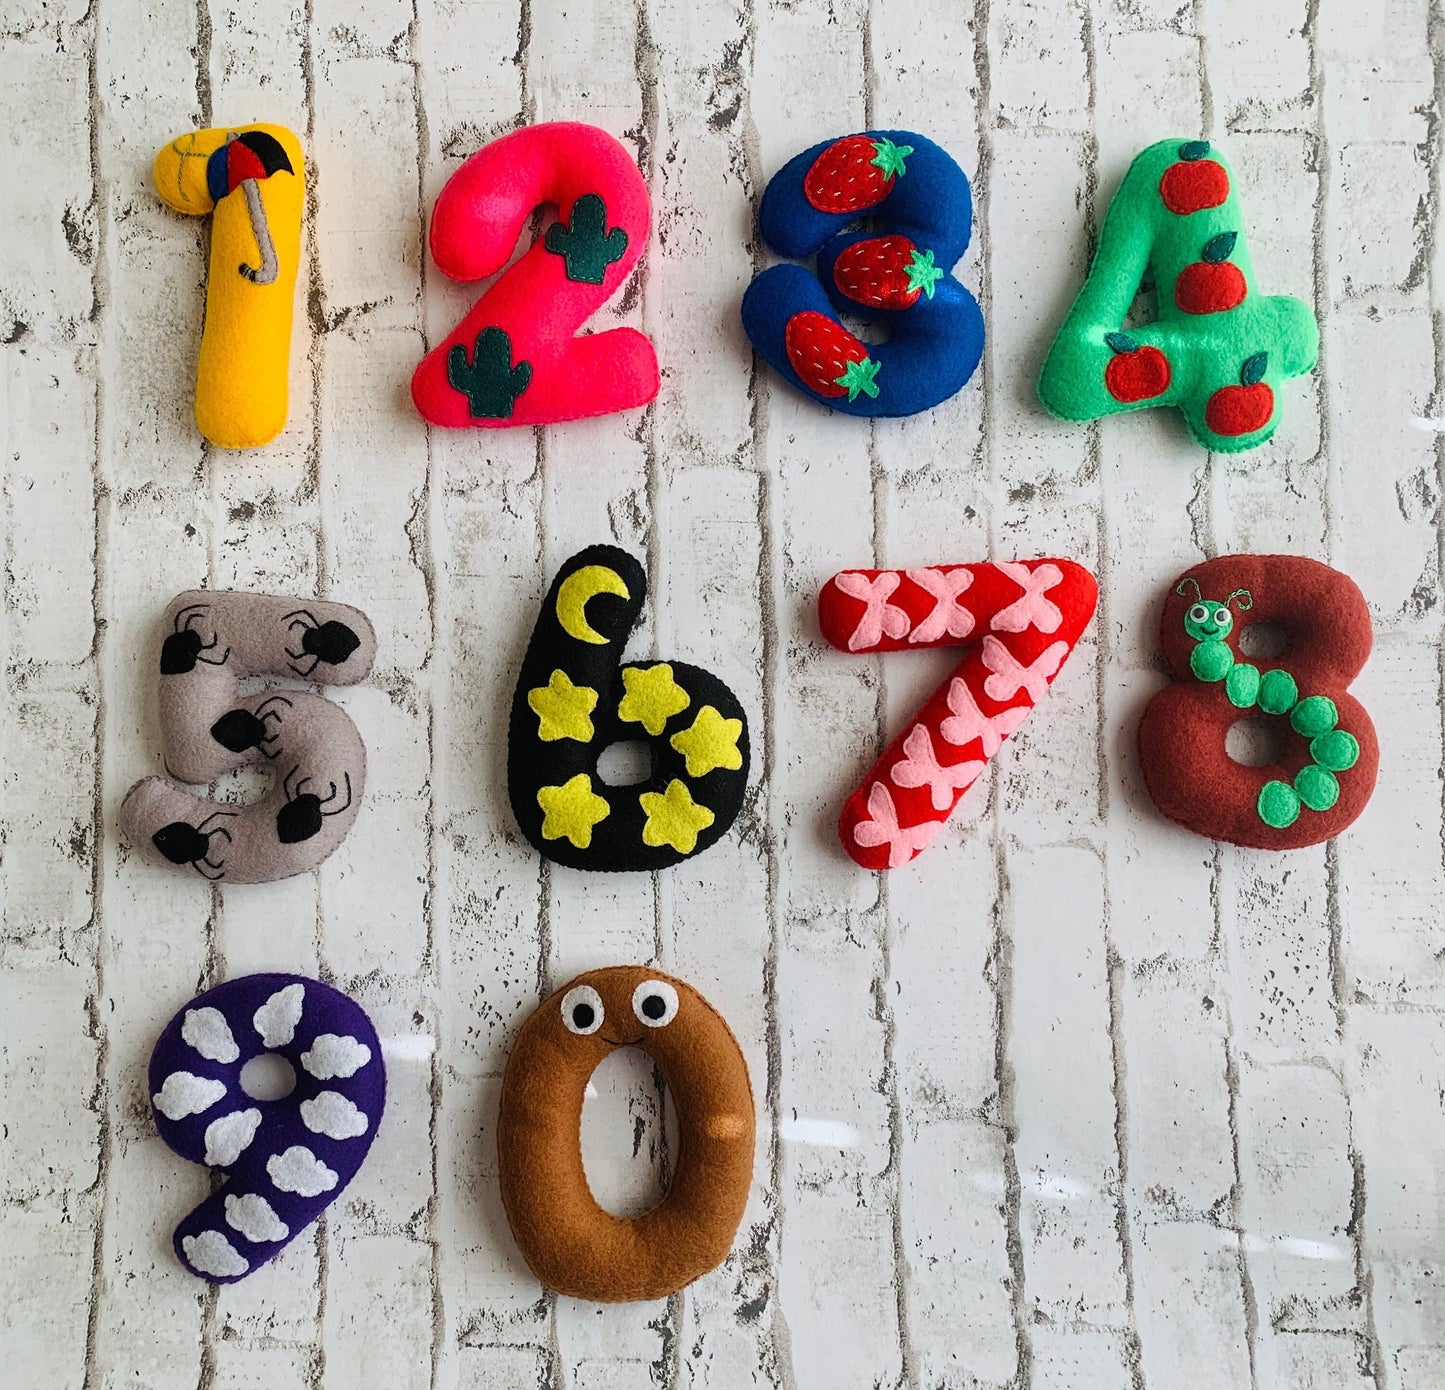 Felt  Fleece Numbers, learning toys, colorful numbers for kids, educational toy, soft numbers 0-9, toddler educational toys, with a free bag